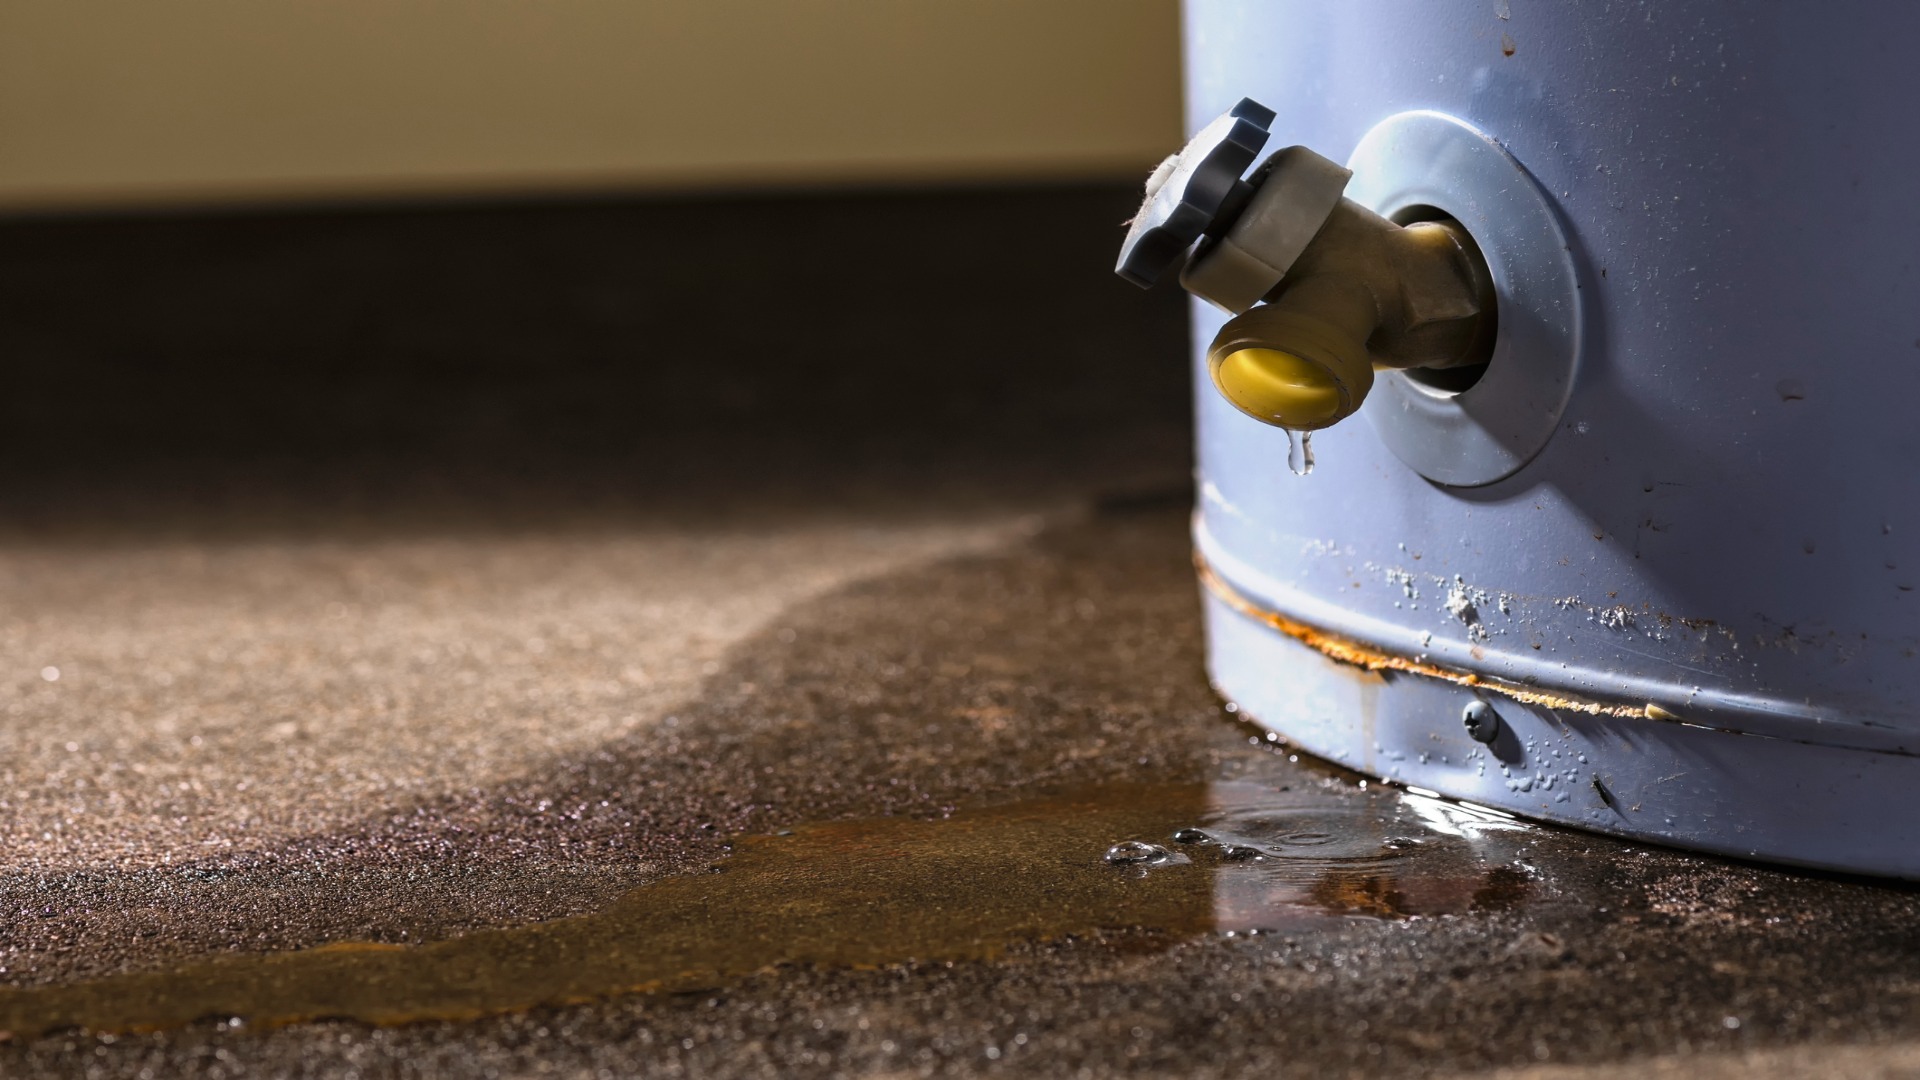 The Effects of Hard Water on Your Plumbing System